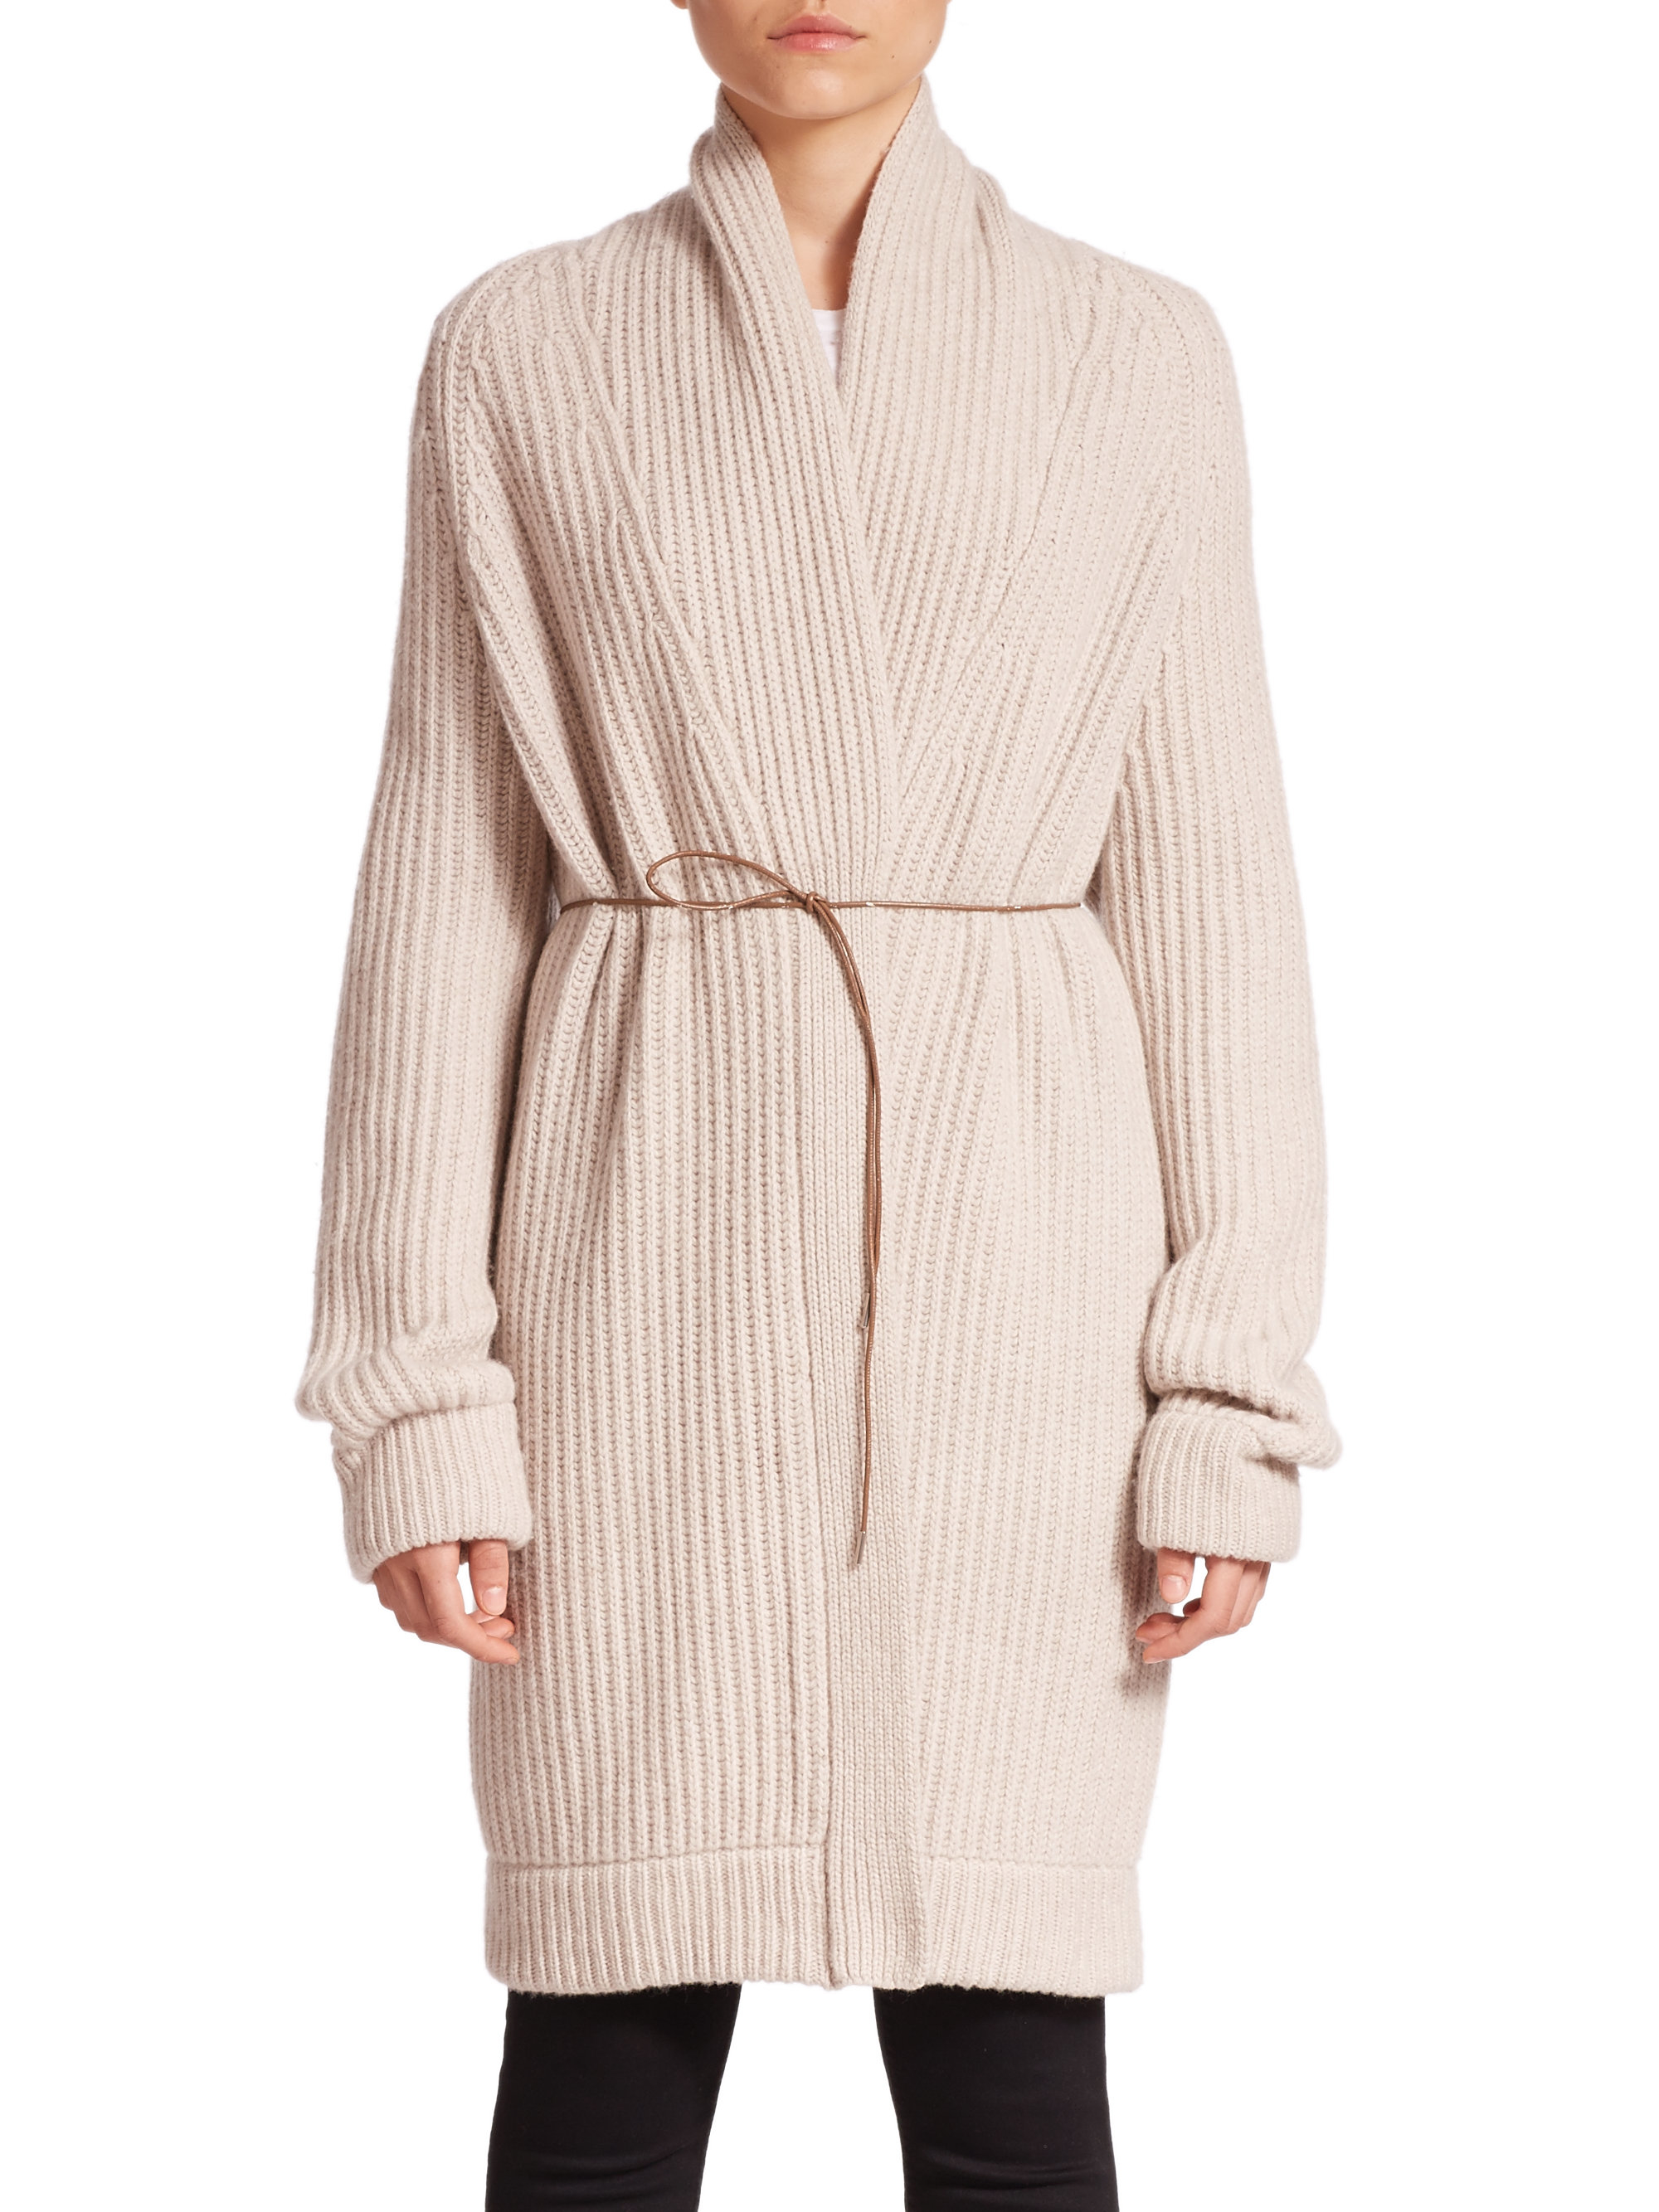 Lyst - Helmut Lang Wool & Cashmere Belted Long Cardigan in Natural